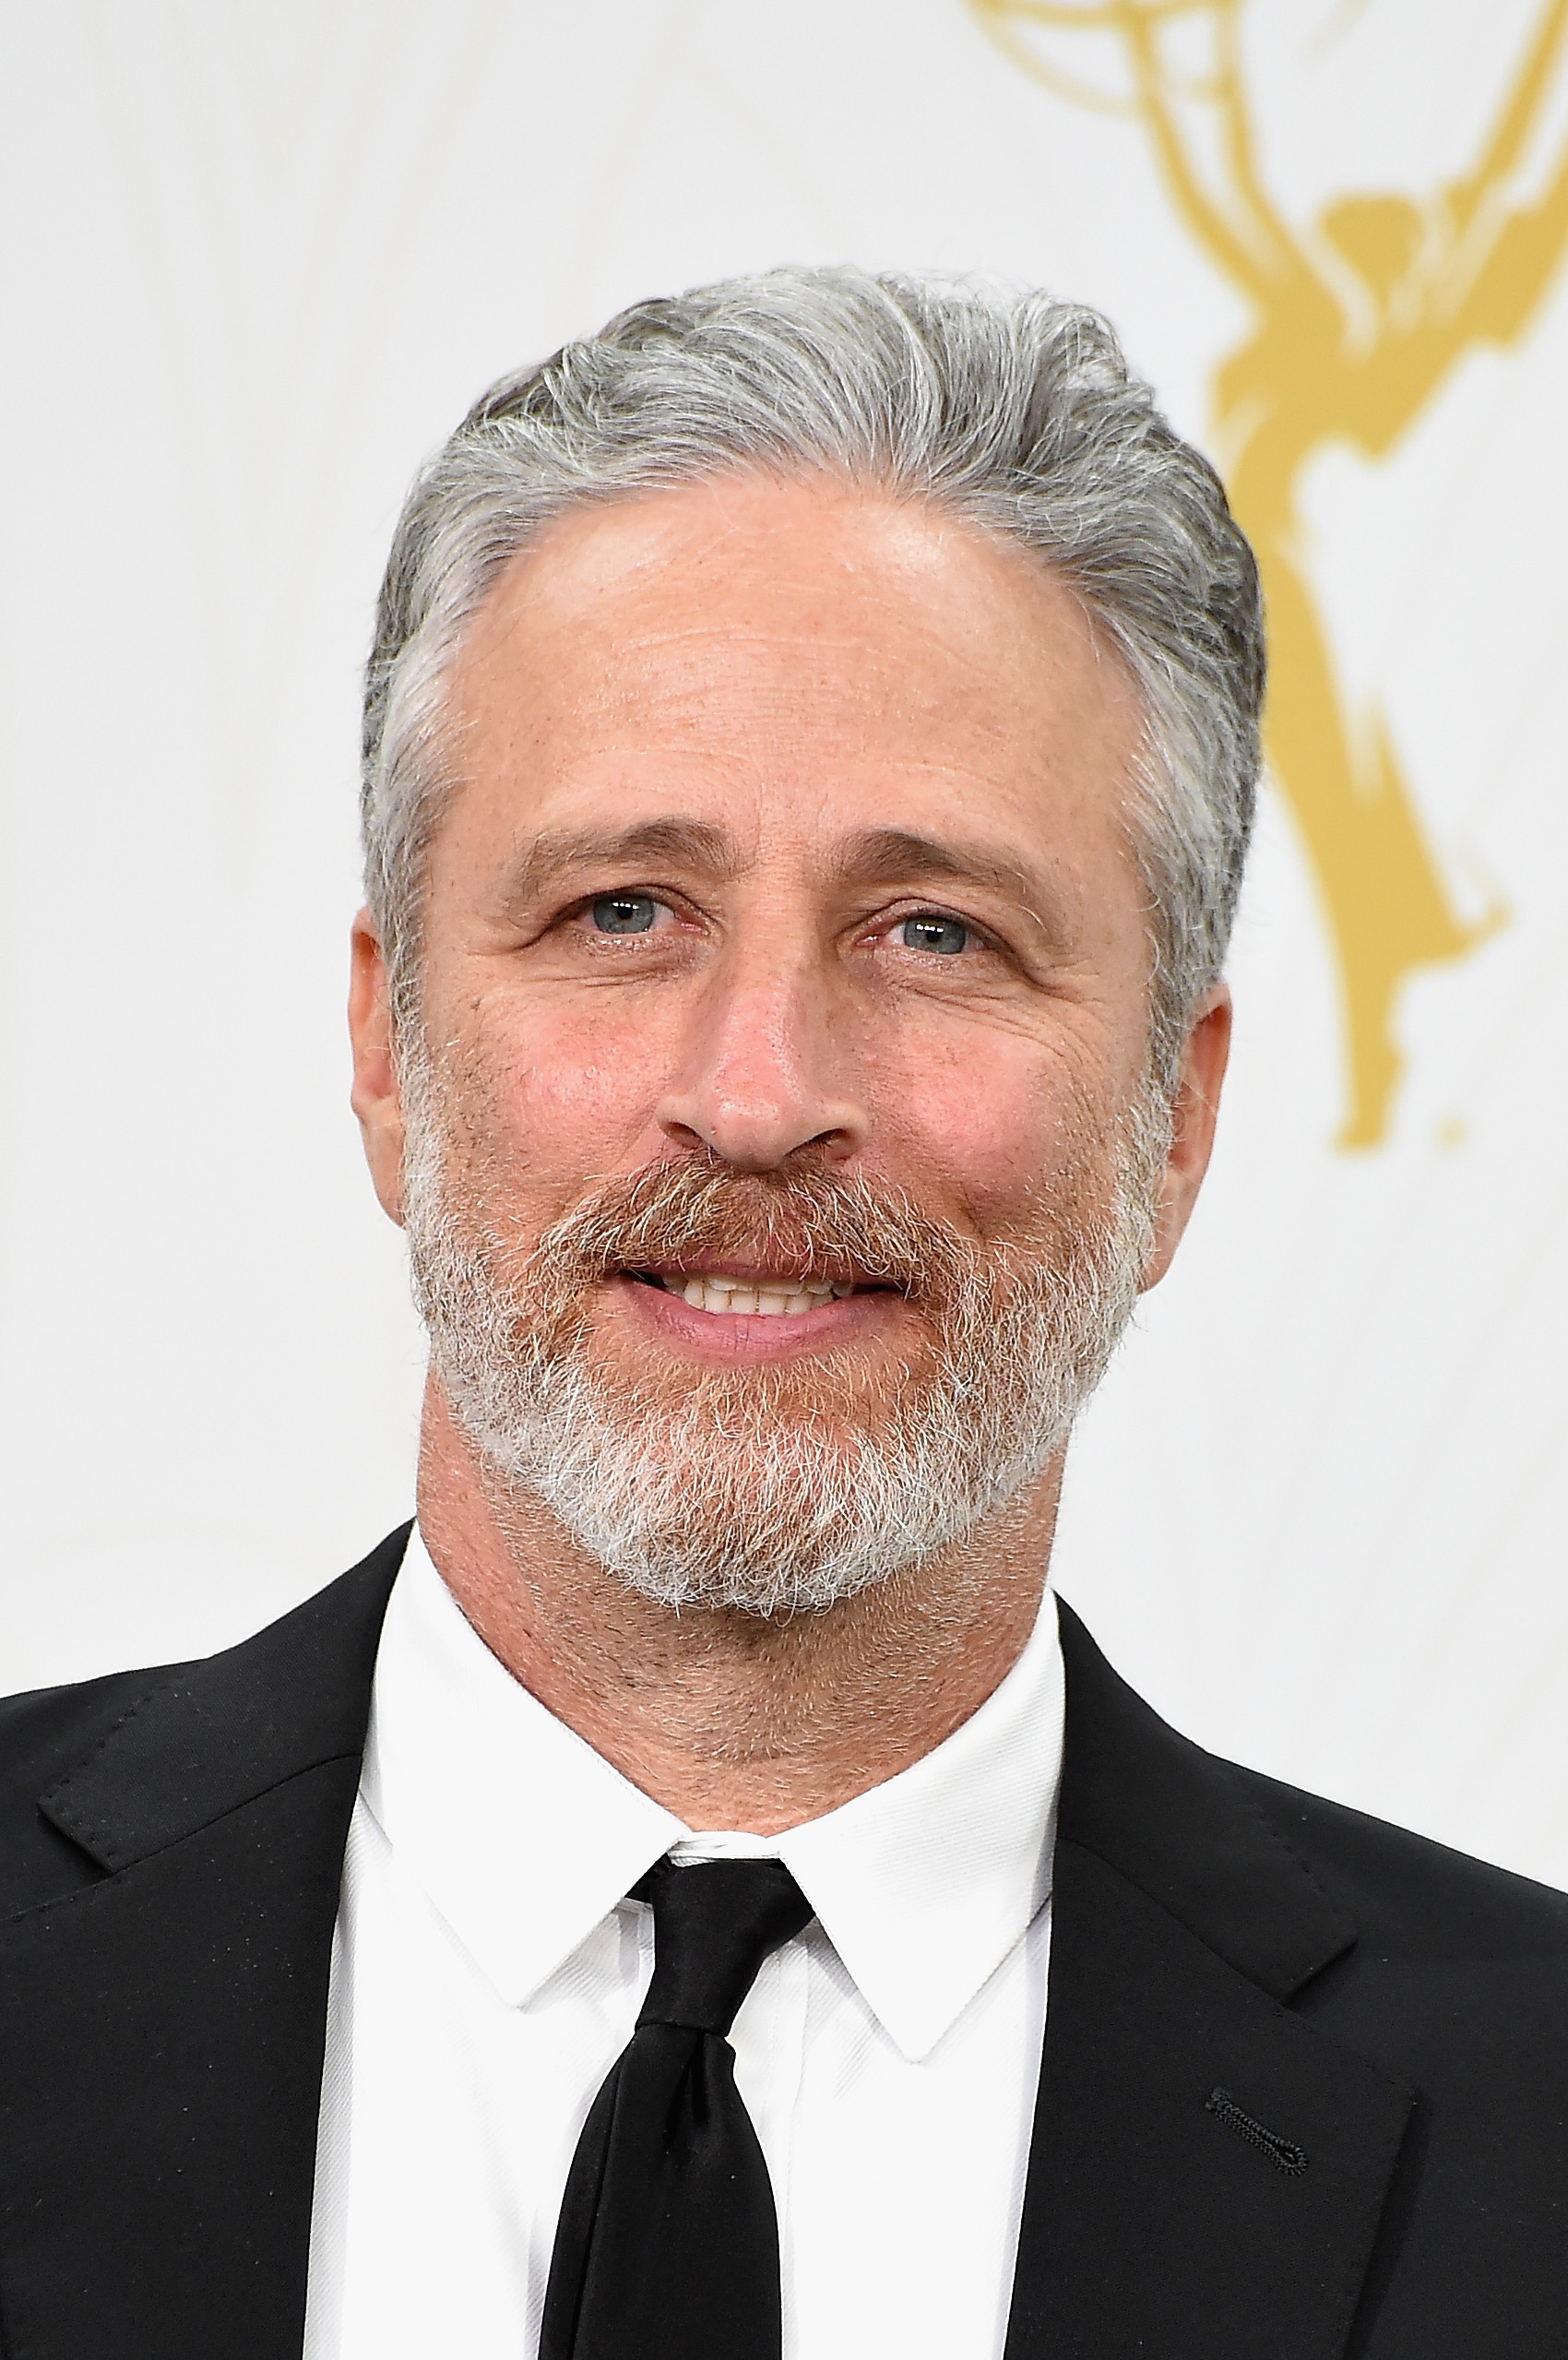 Jon Stewart at the 67th Annual Primetime Emmy Awards in Los Angeles on Sept. 20, 2015.